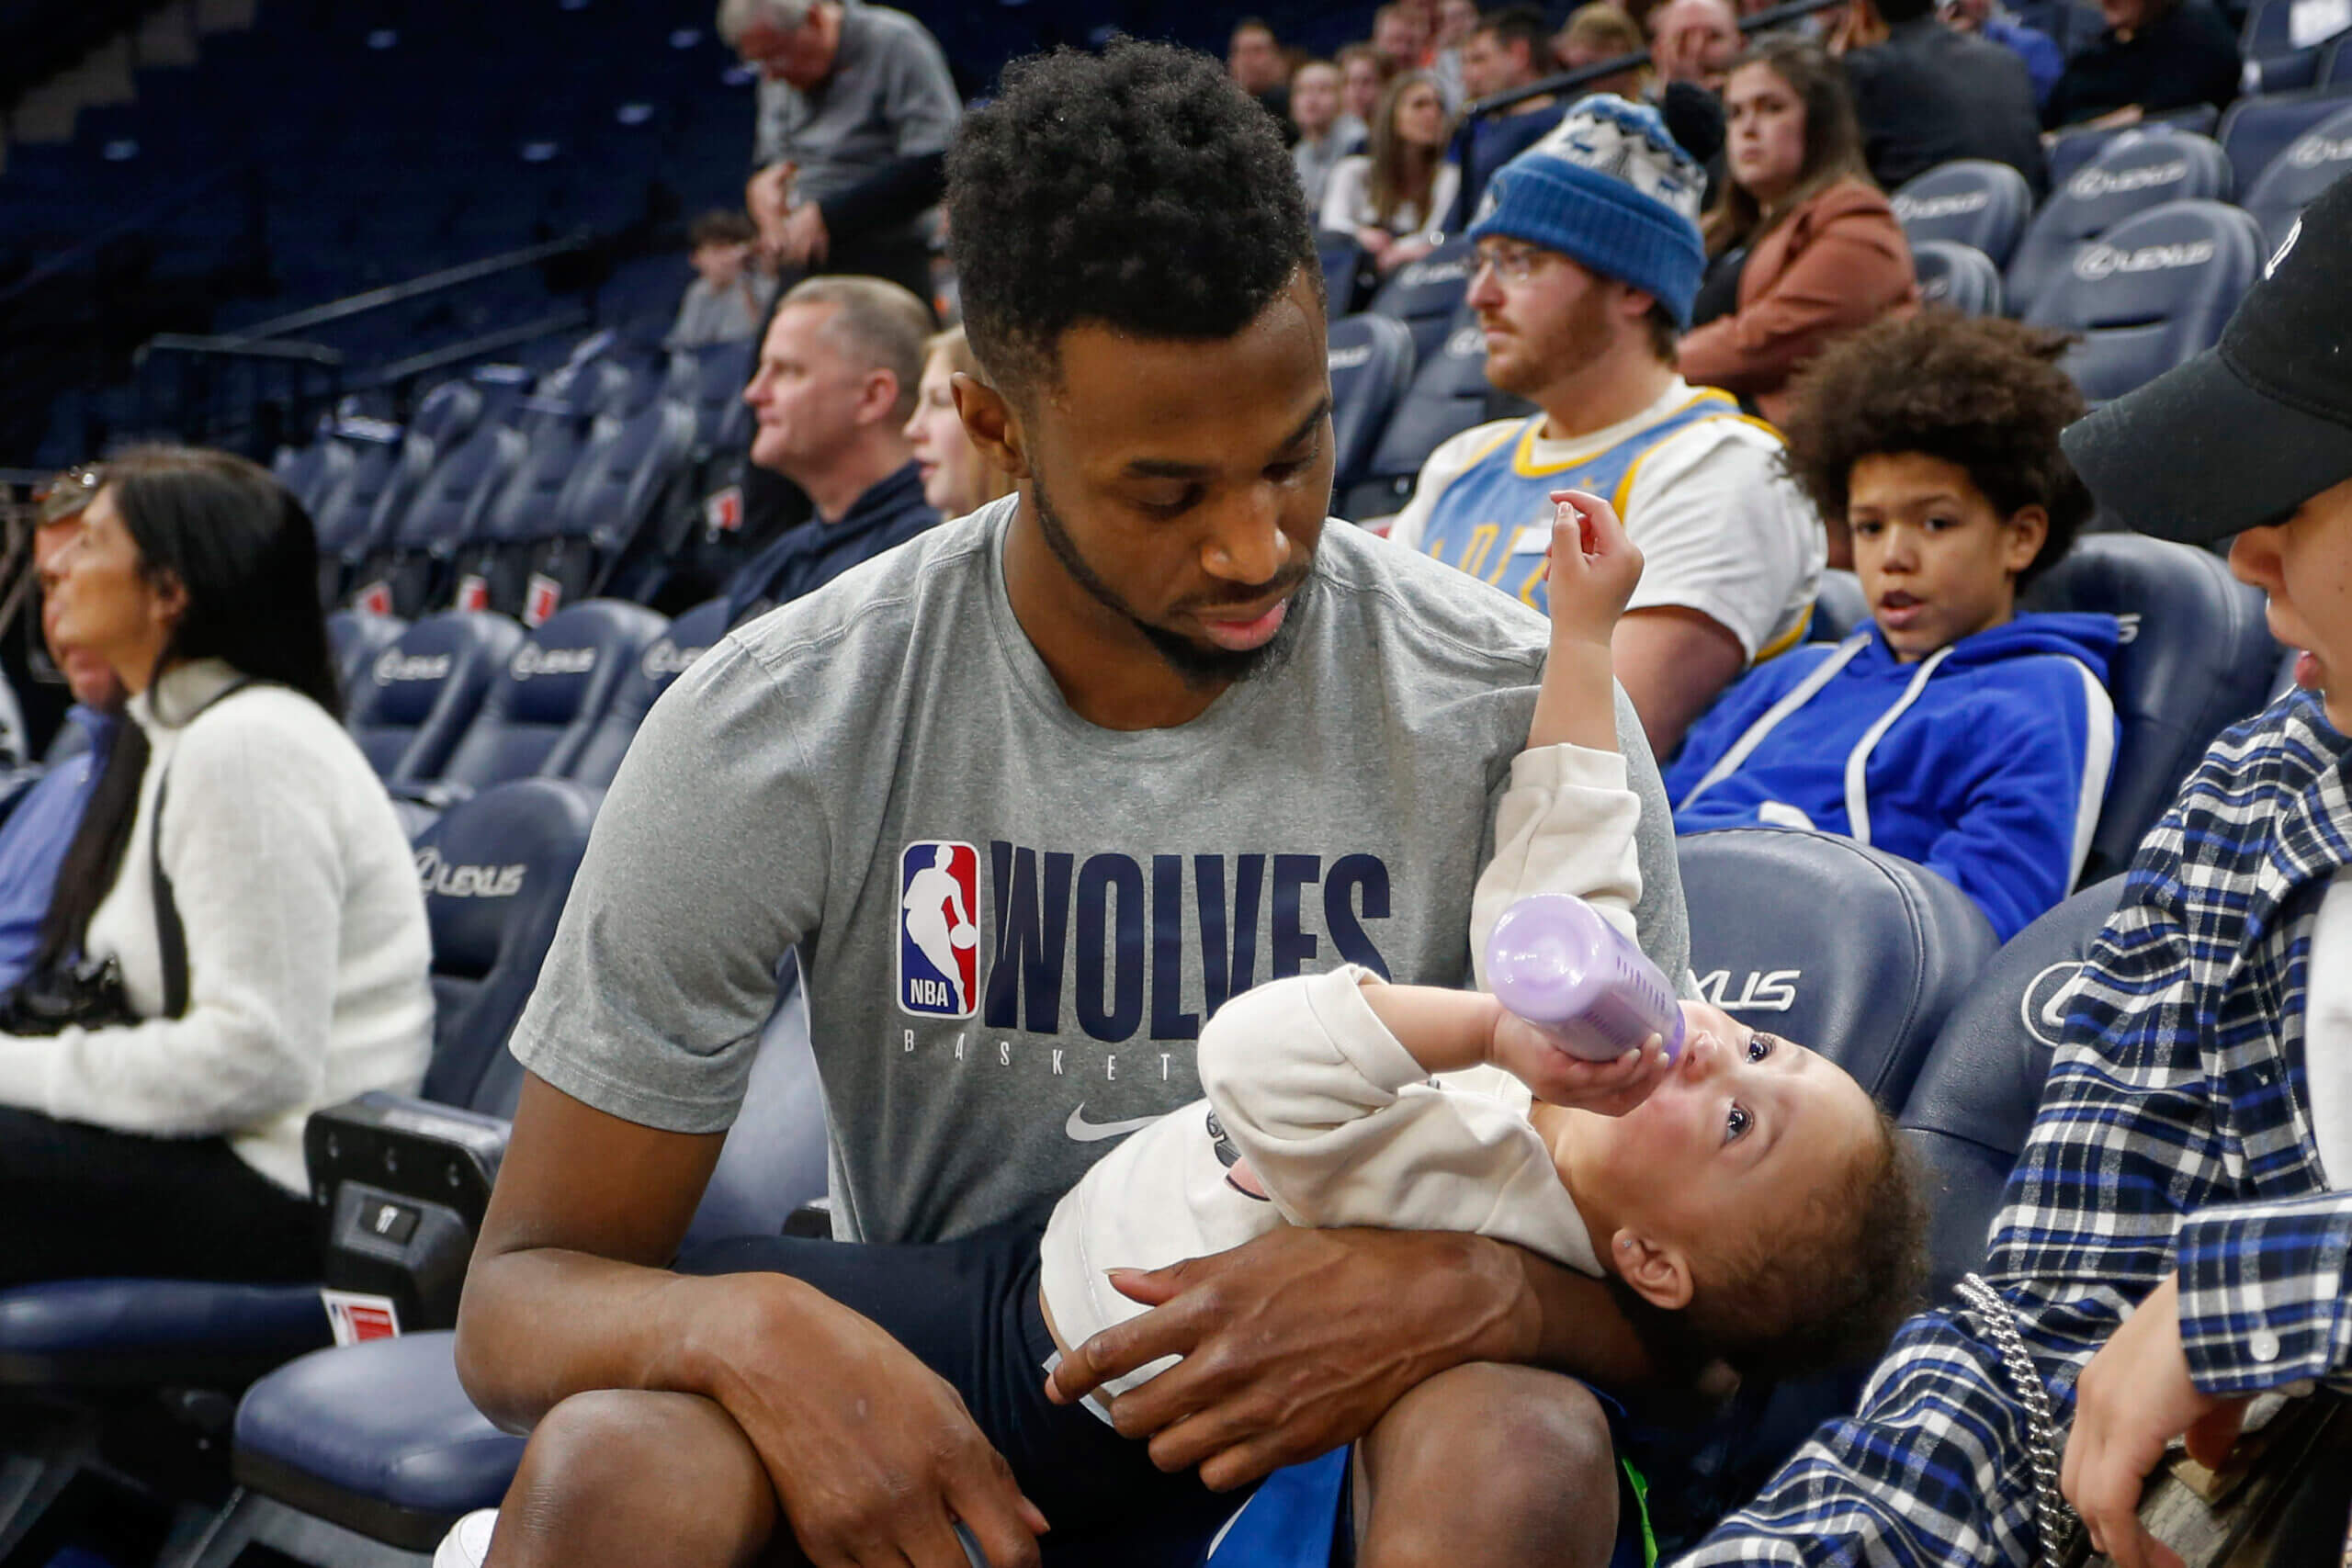 For Andrew Wiggins, fatherhood is the heart and soul behind his NBA